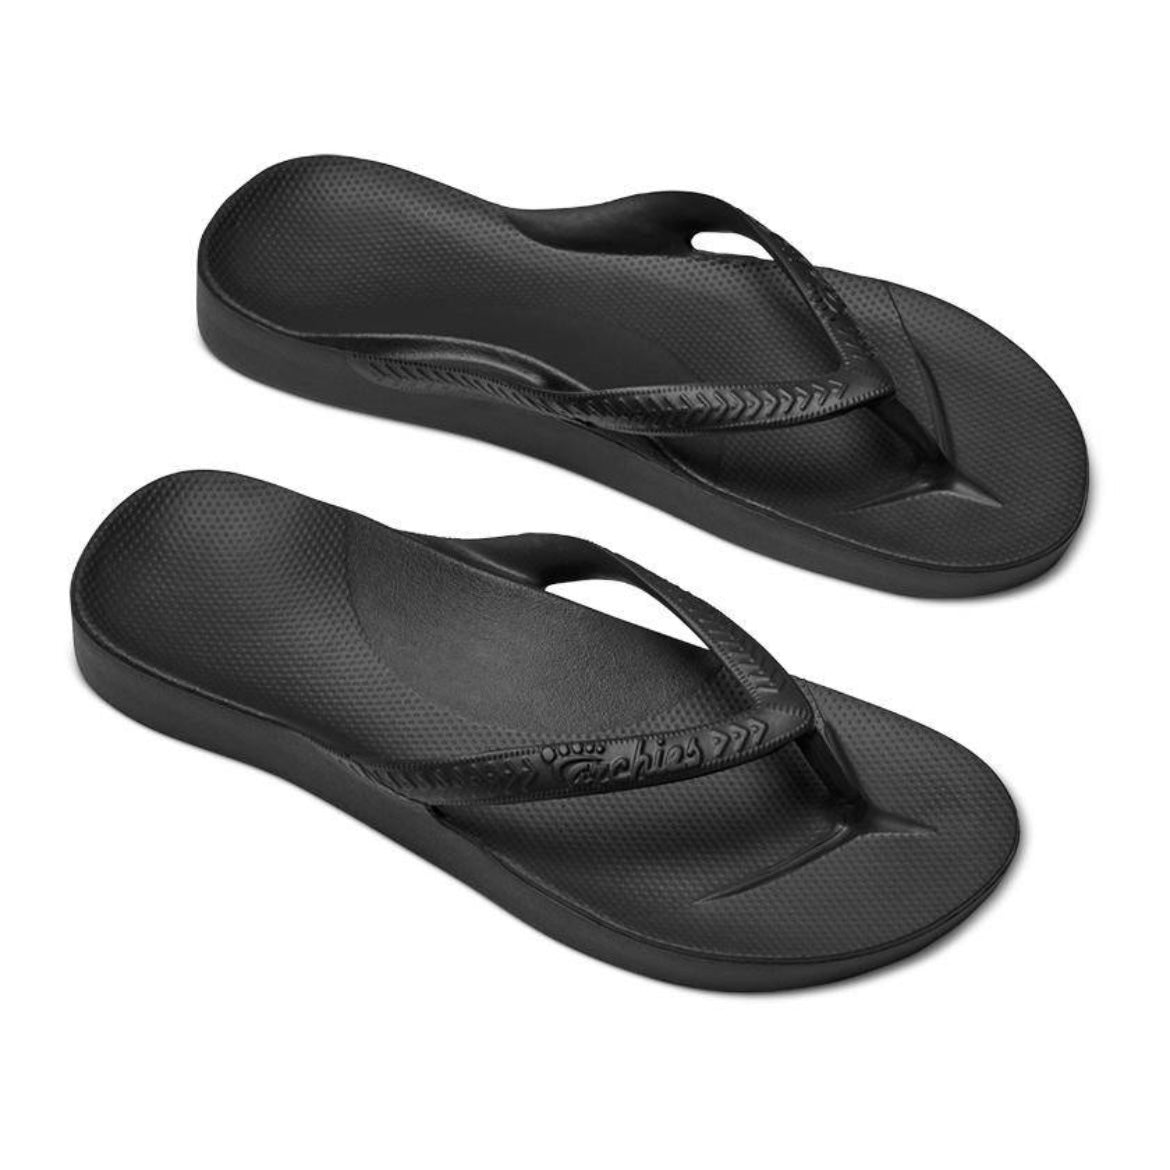 Archies Black Arch Support Thongs Flip Flop Orthotic